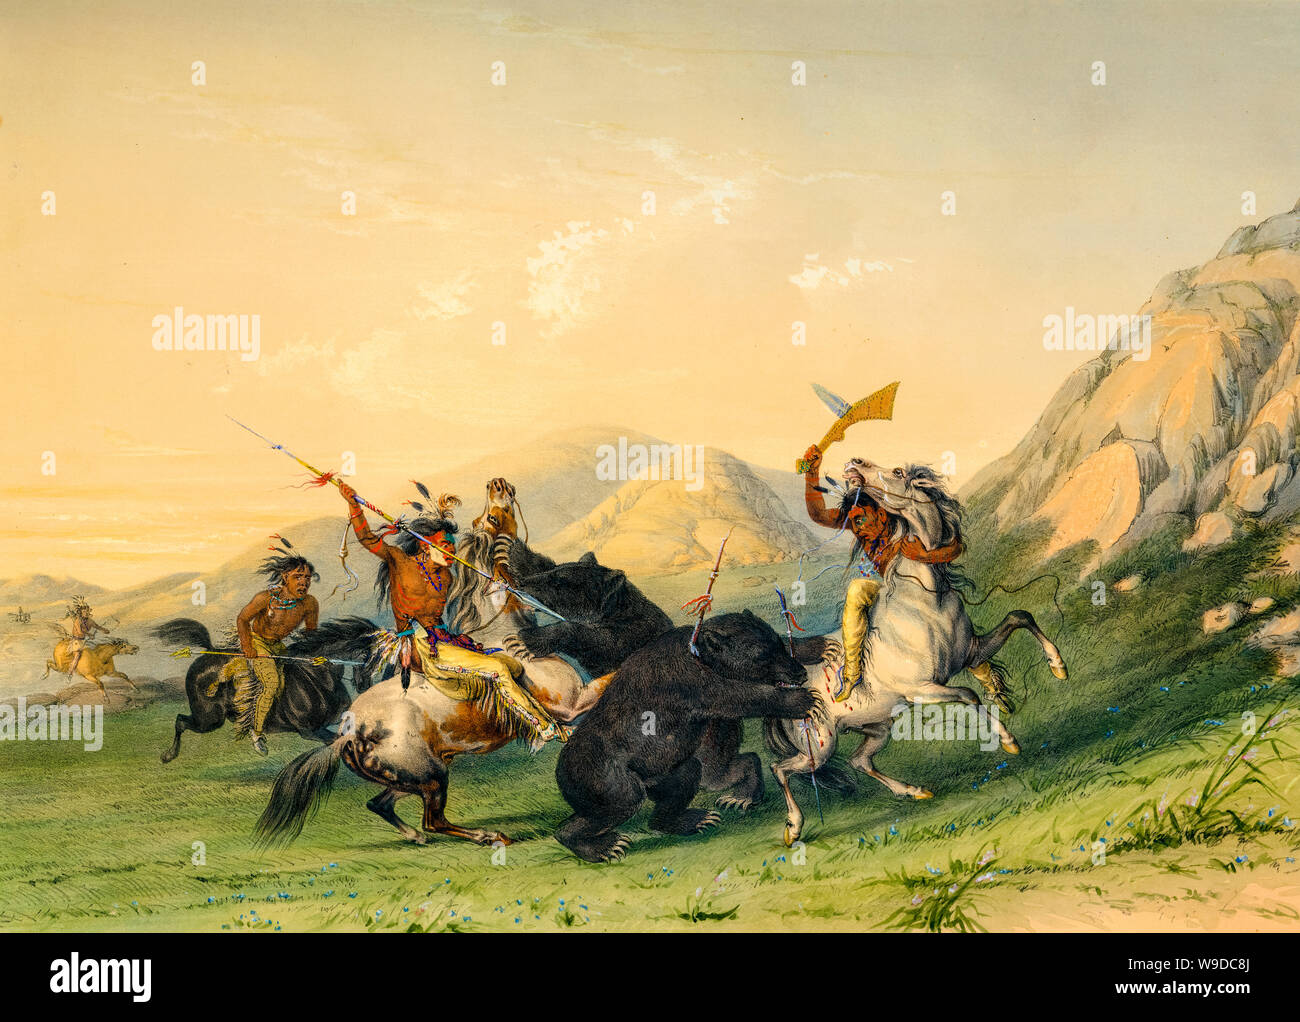 George Catlin, painting, Attacking the Grizzly Bear, 1844 Stock Photo